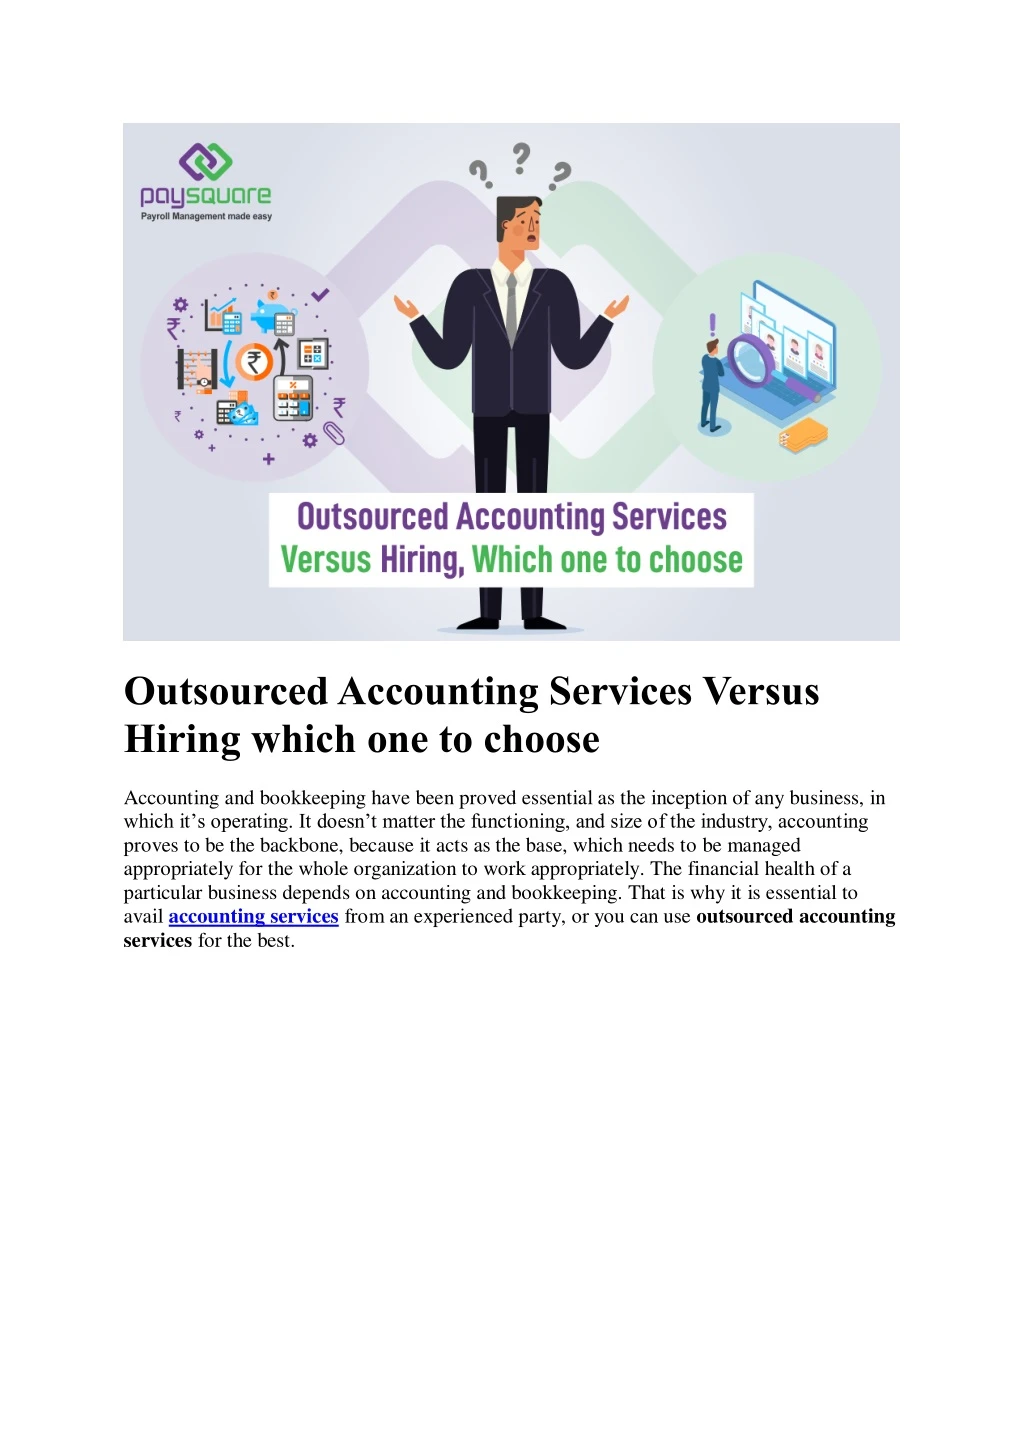 outsourced accounting services versus hiring